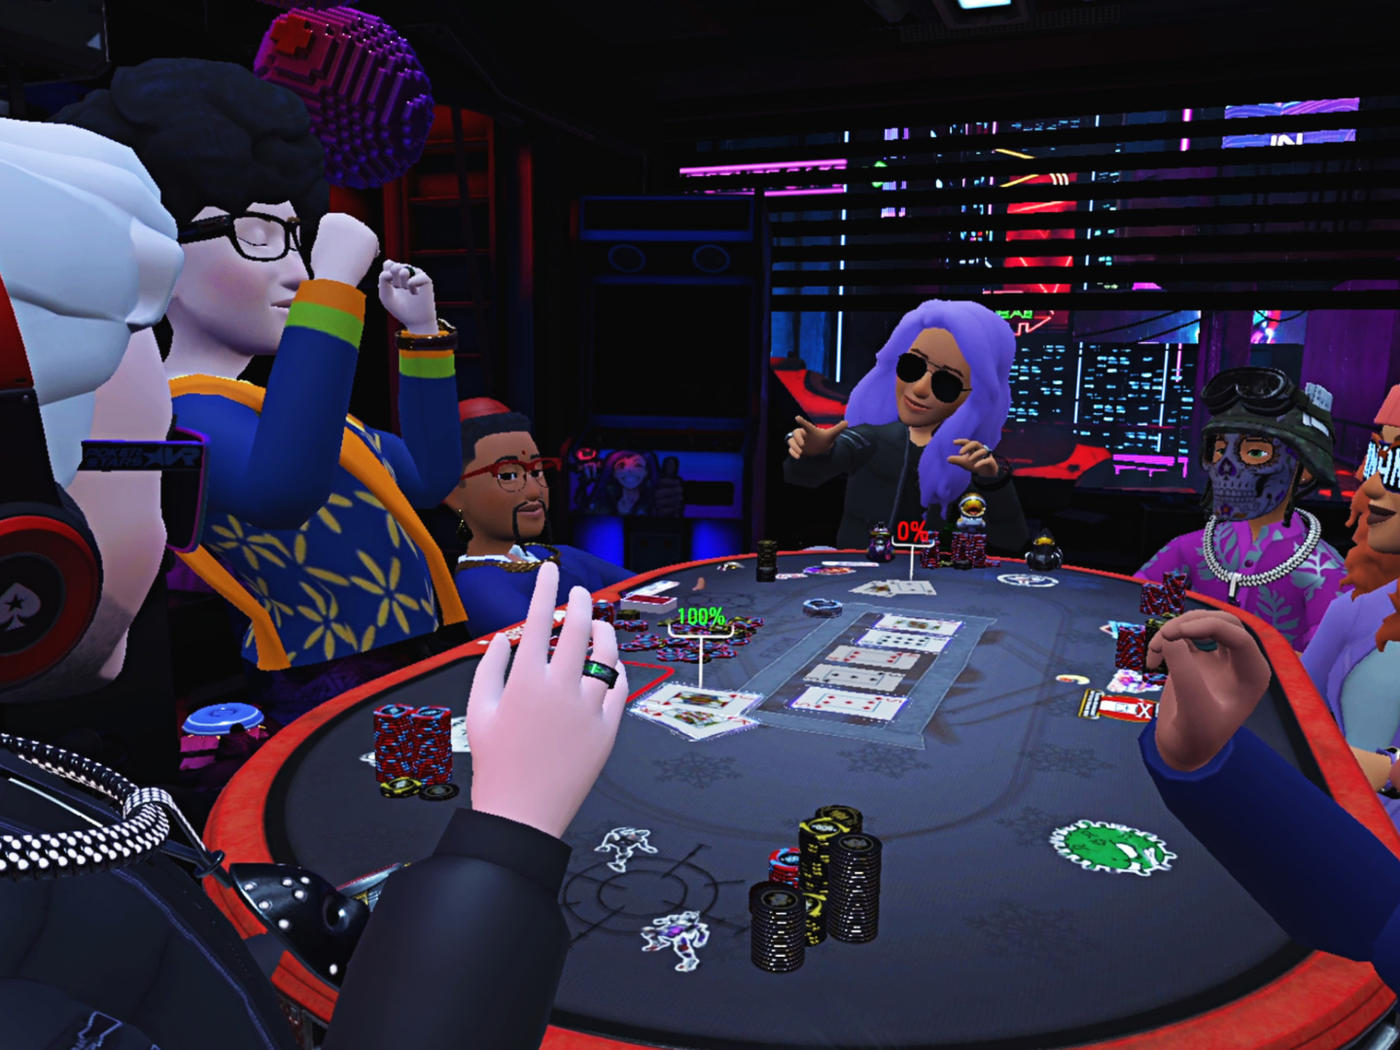 Top 5 High Return To Player Online Casino Games